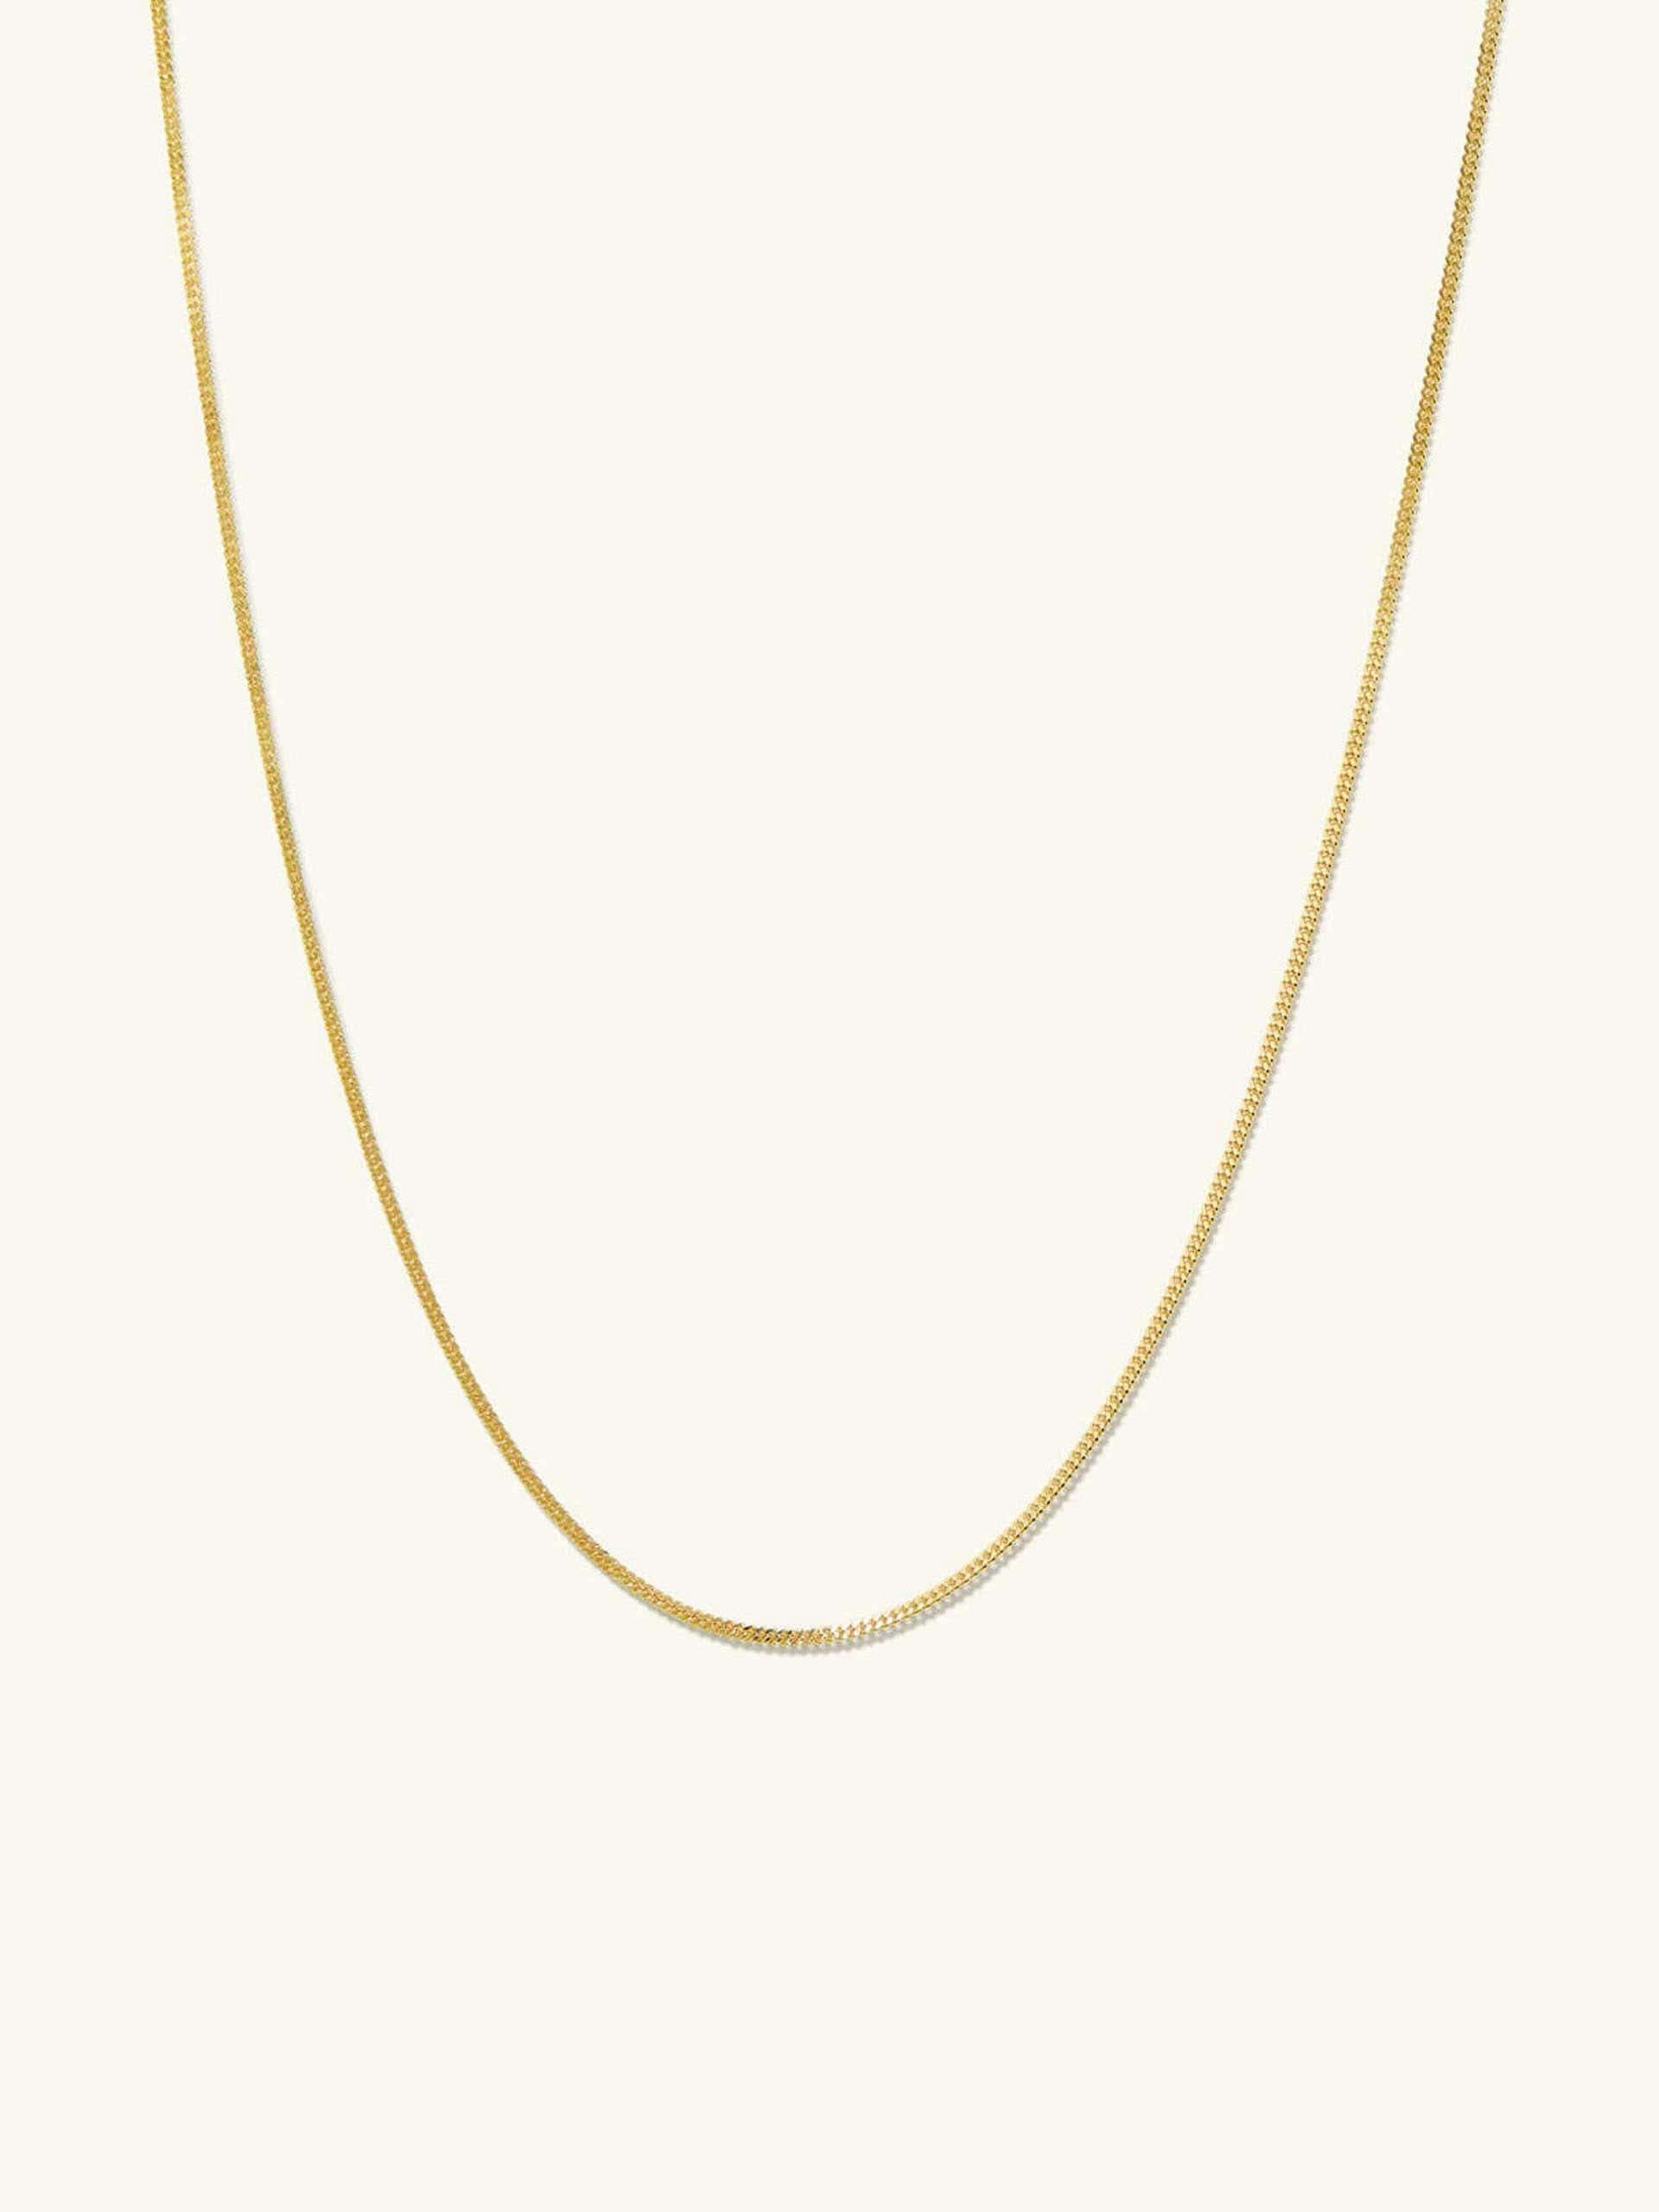 Yellow gold curb chain necklace